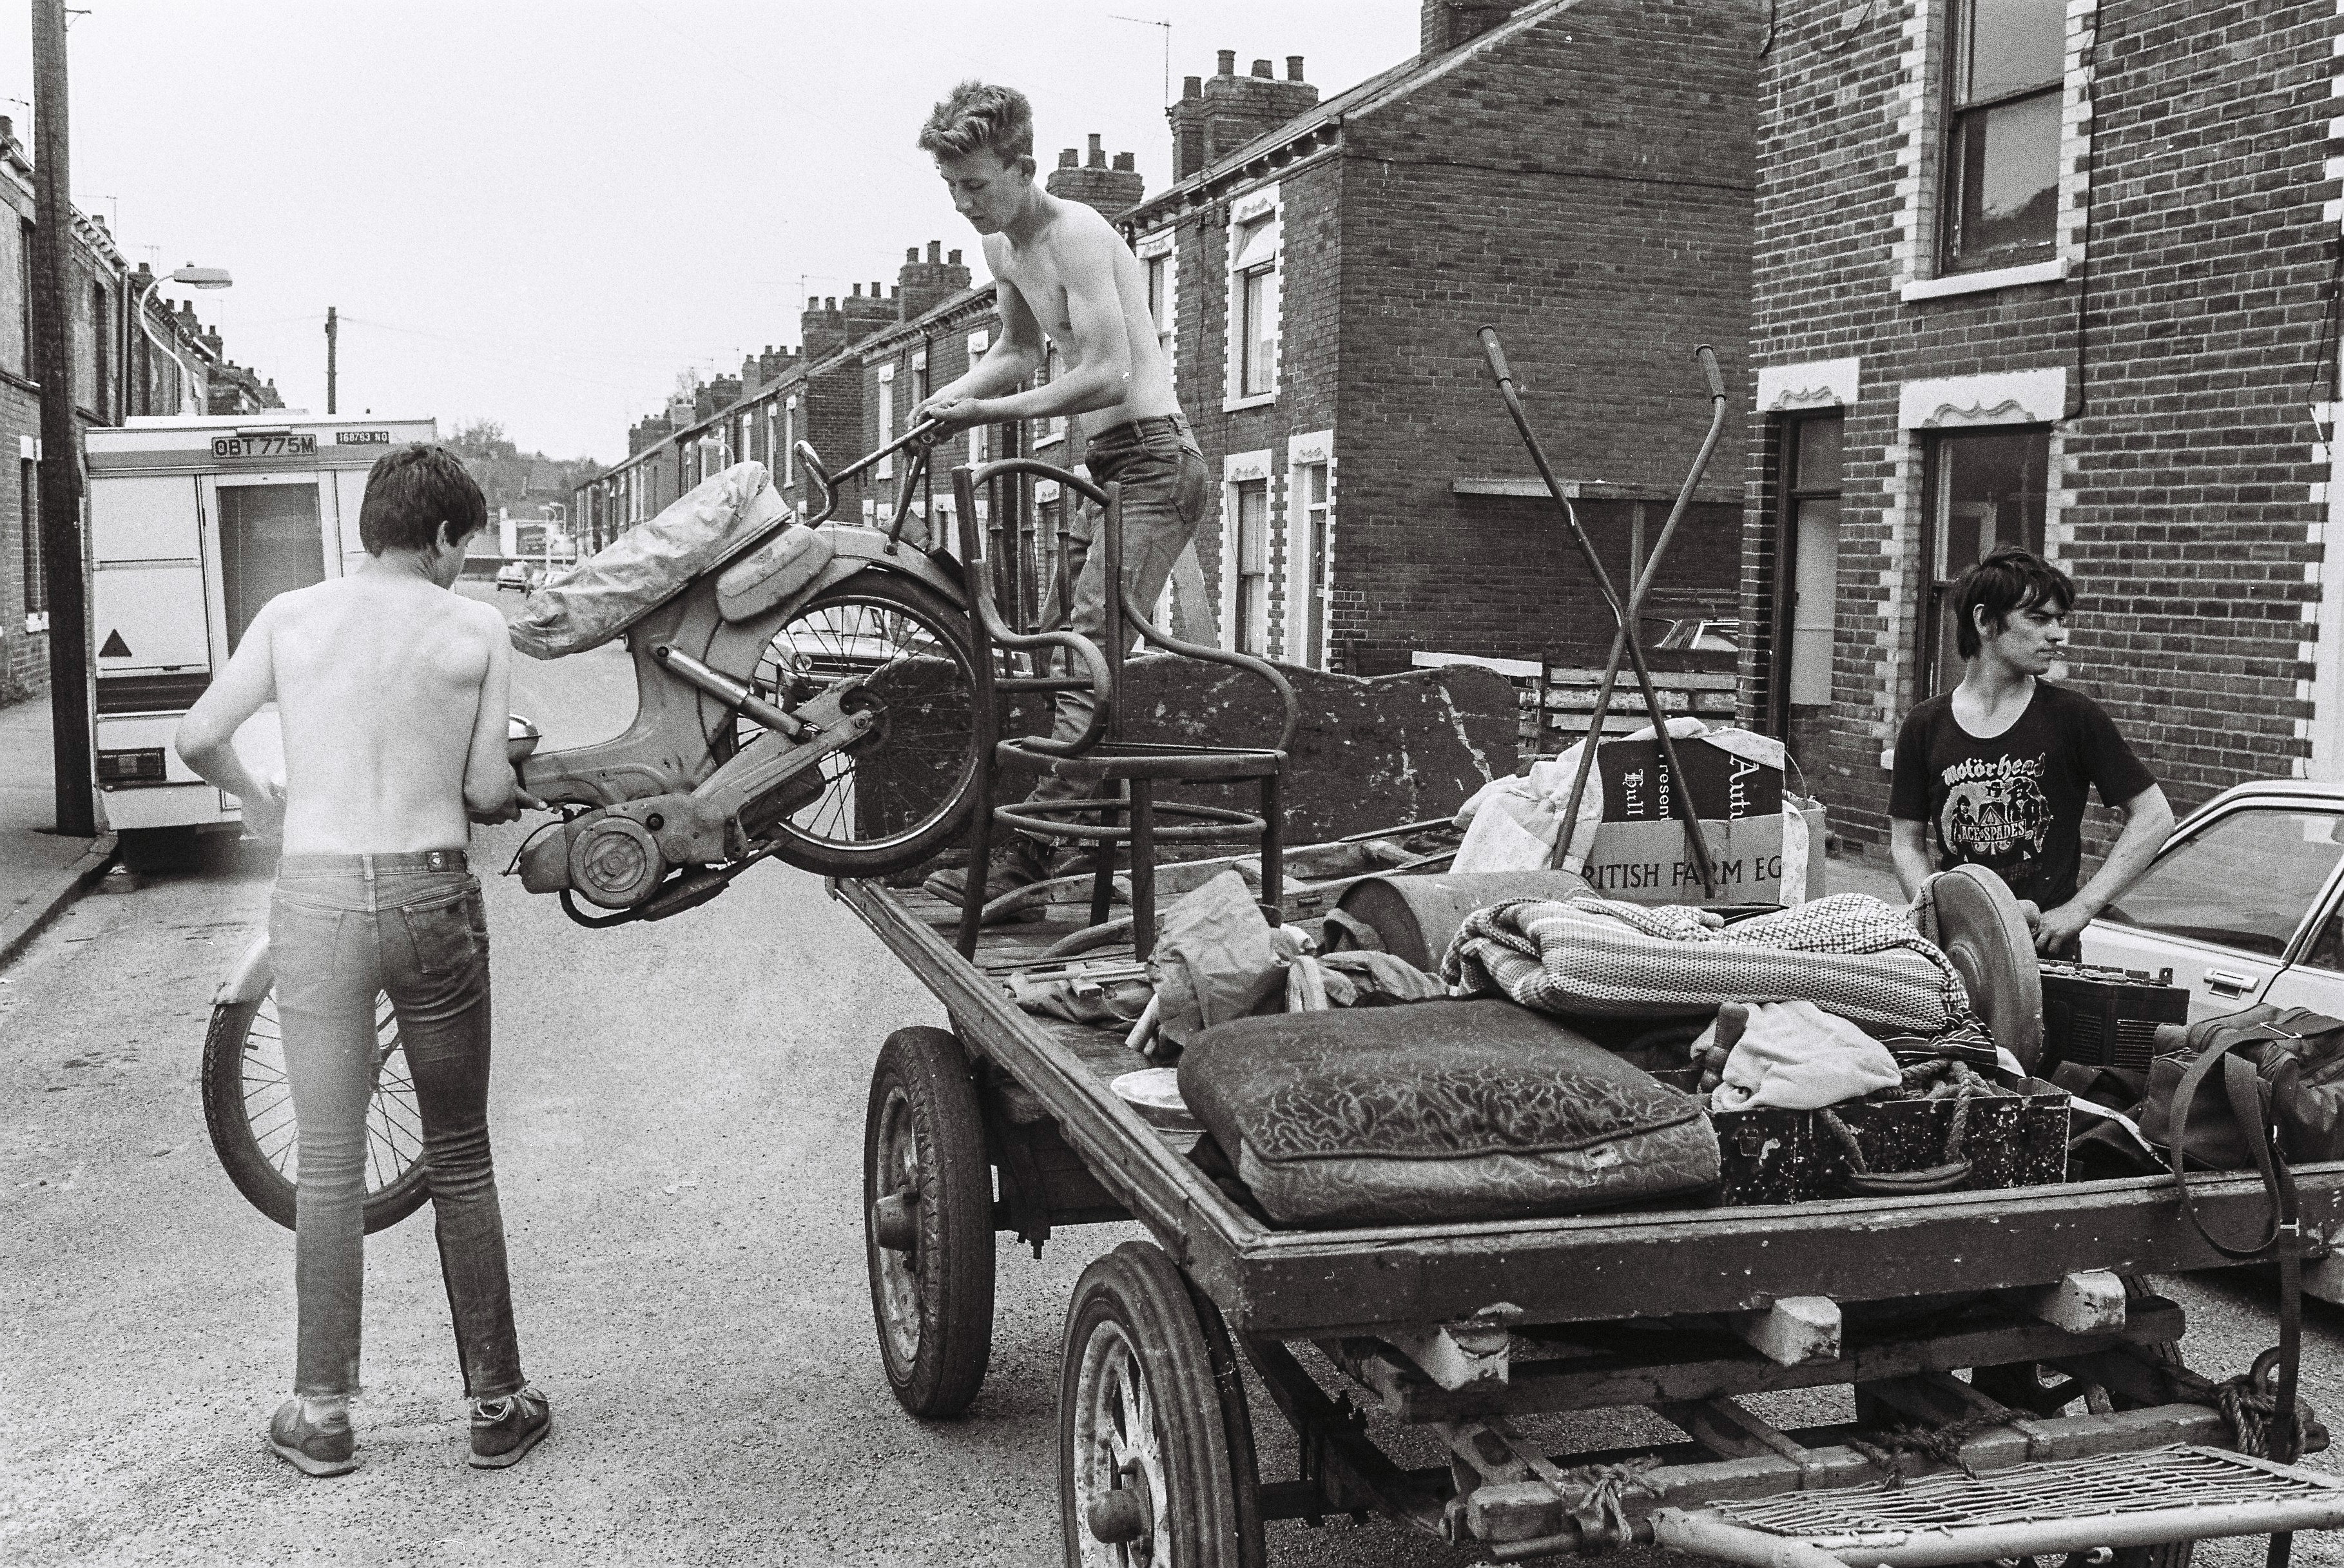 George Norris Jnr and Glen Collins loading a motorcycle onto a rulley in Stepney Lane, off Beverley Road, Hull.